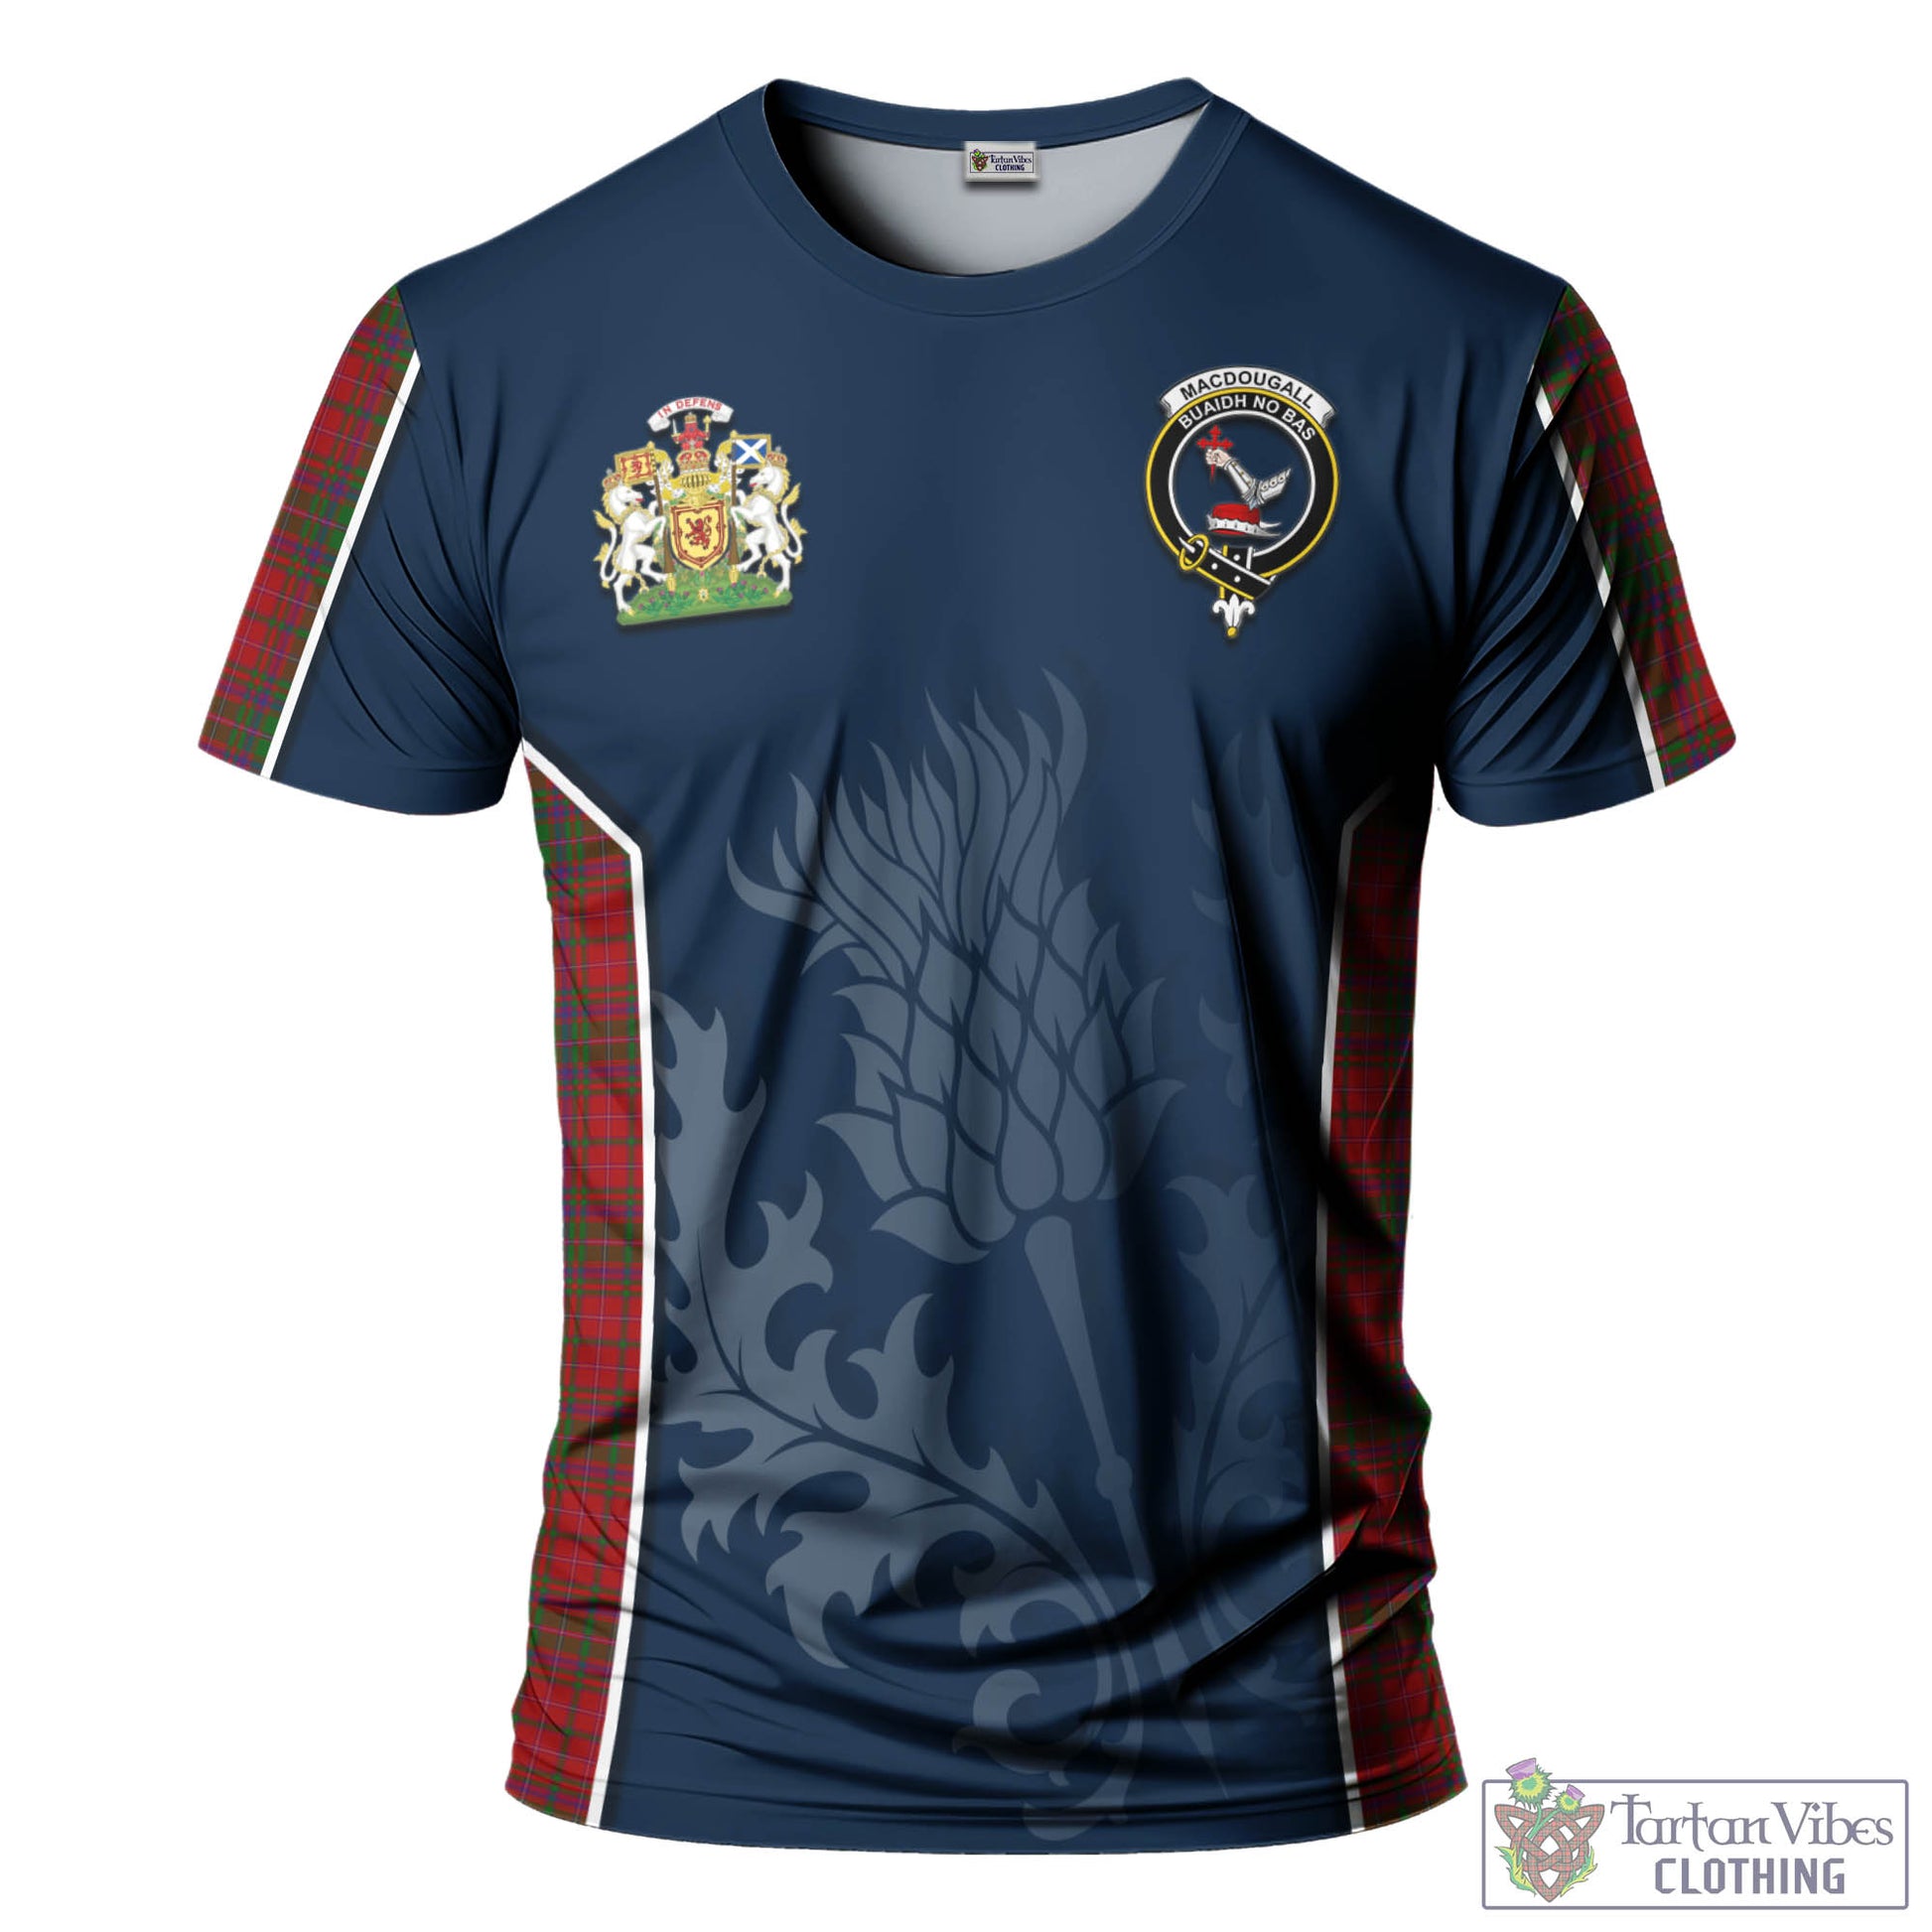 Tartan Vibes Clothing MacDougall Tartan T-Shirt with Family Crest and Scottish Thistle Vibes Sport Style